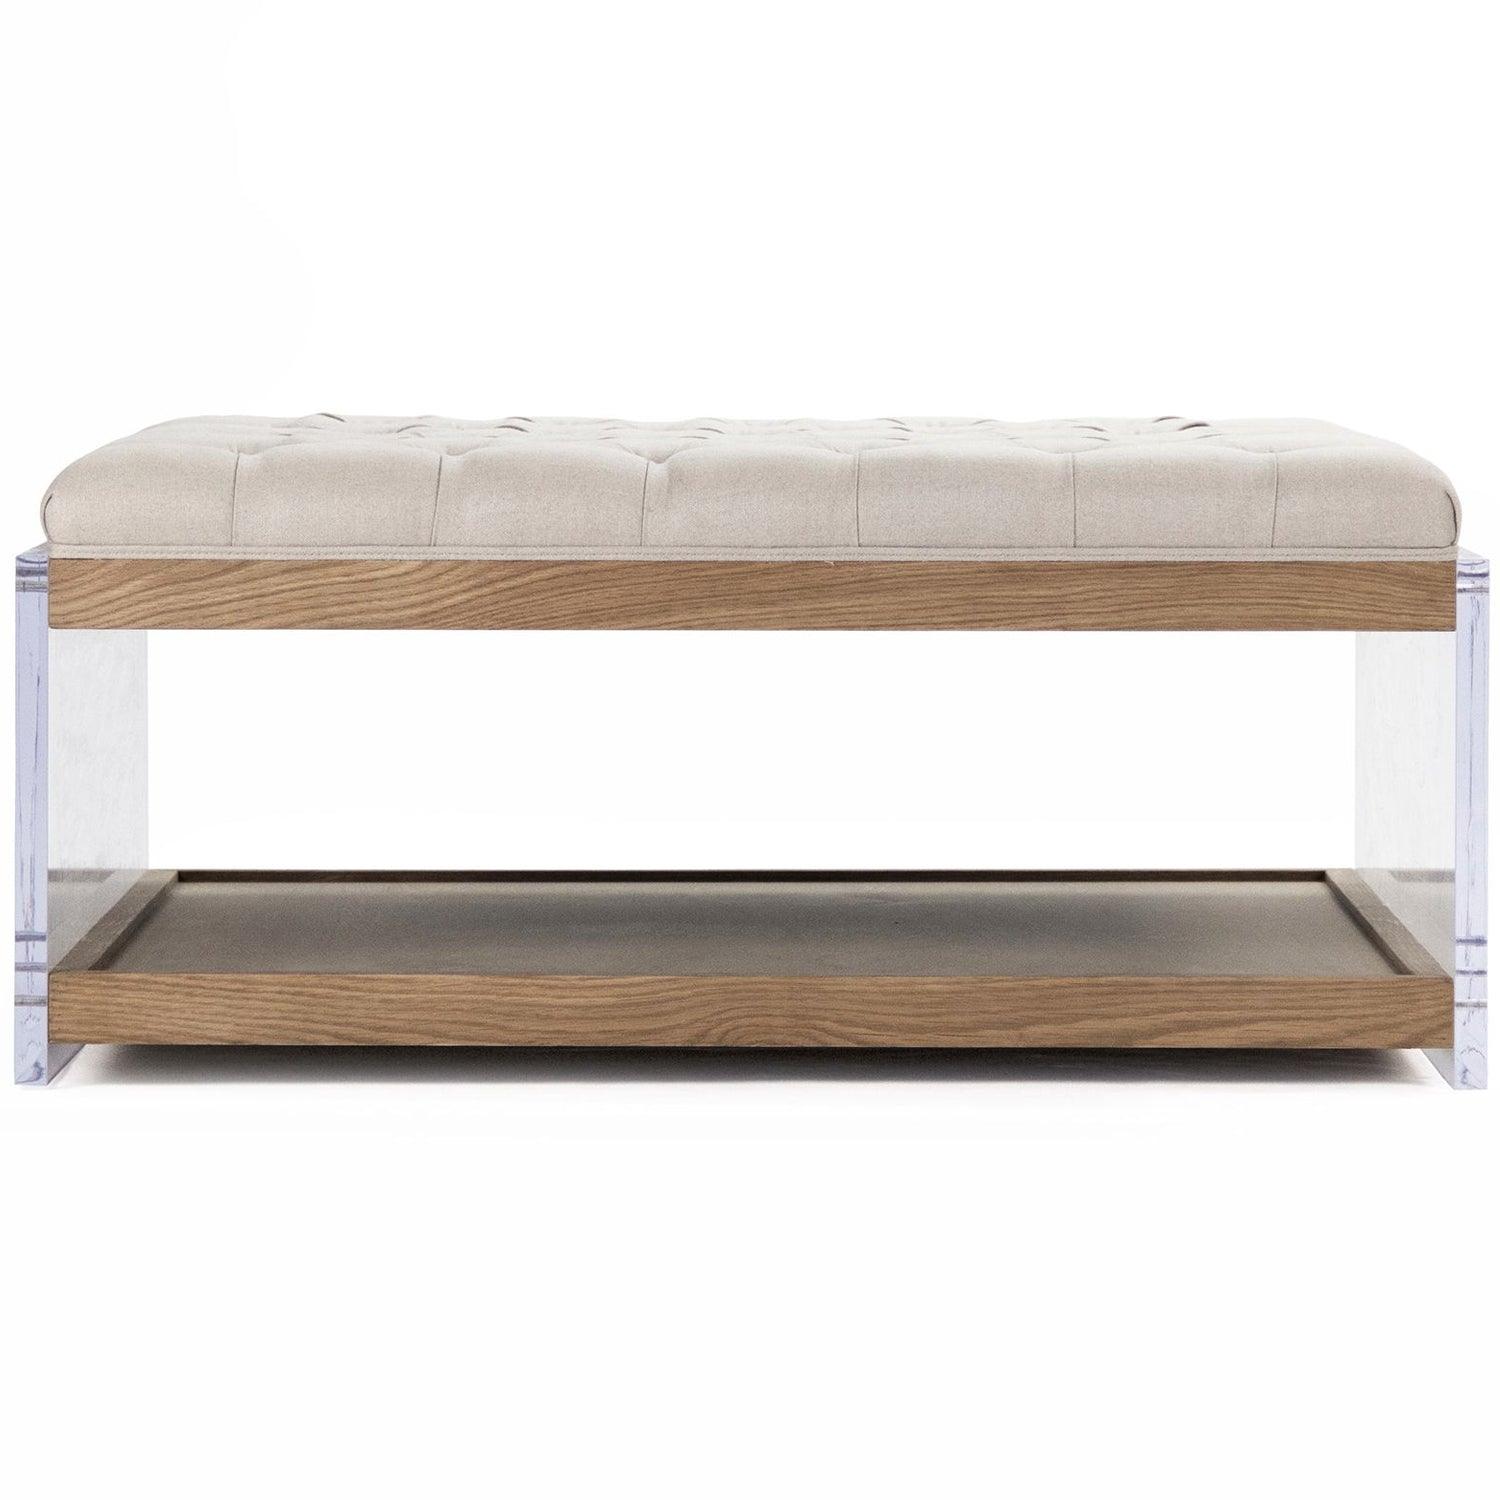 Natural wood Cosmo Acrylic Tufted Ottoman - Belle Escape